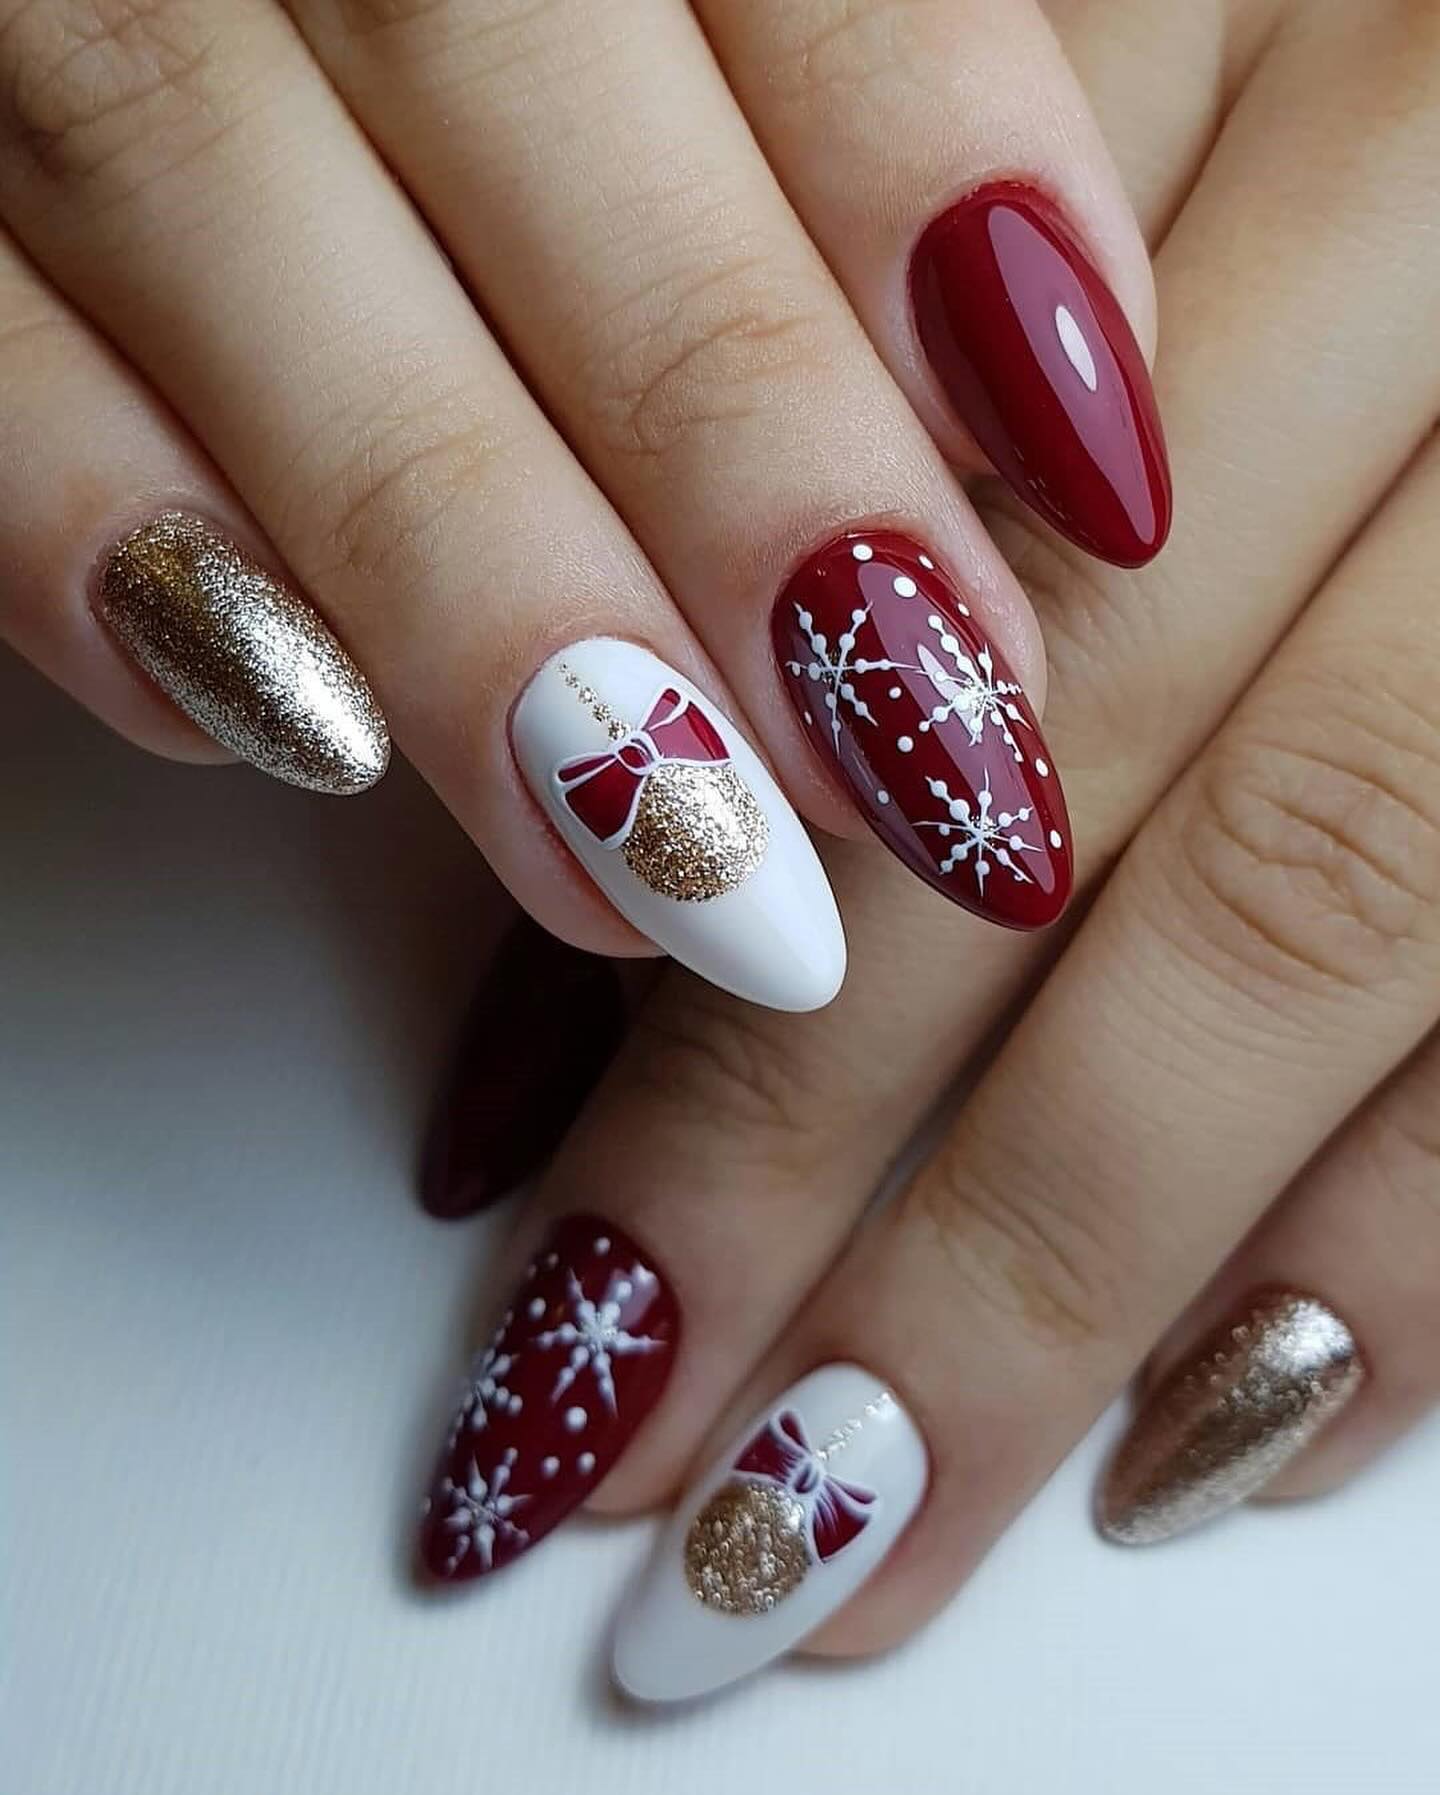 100+ Gorgeous Winter Nail Designs And Ideas images 95